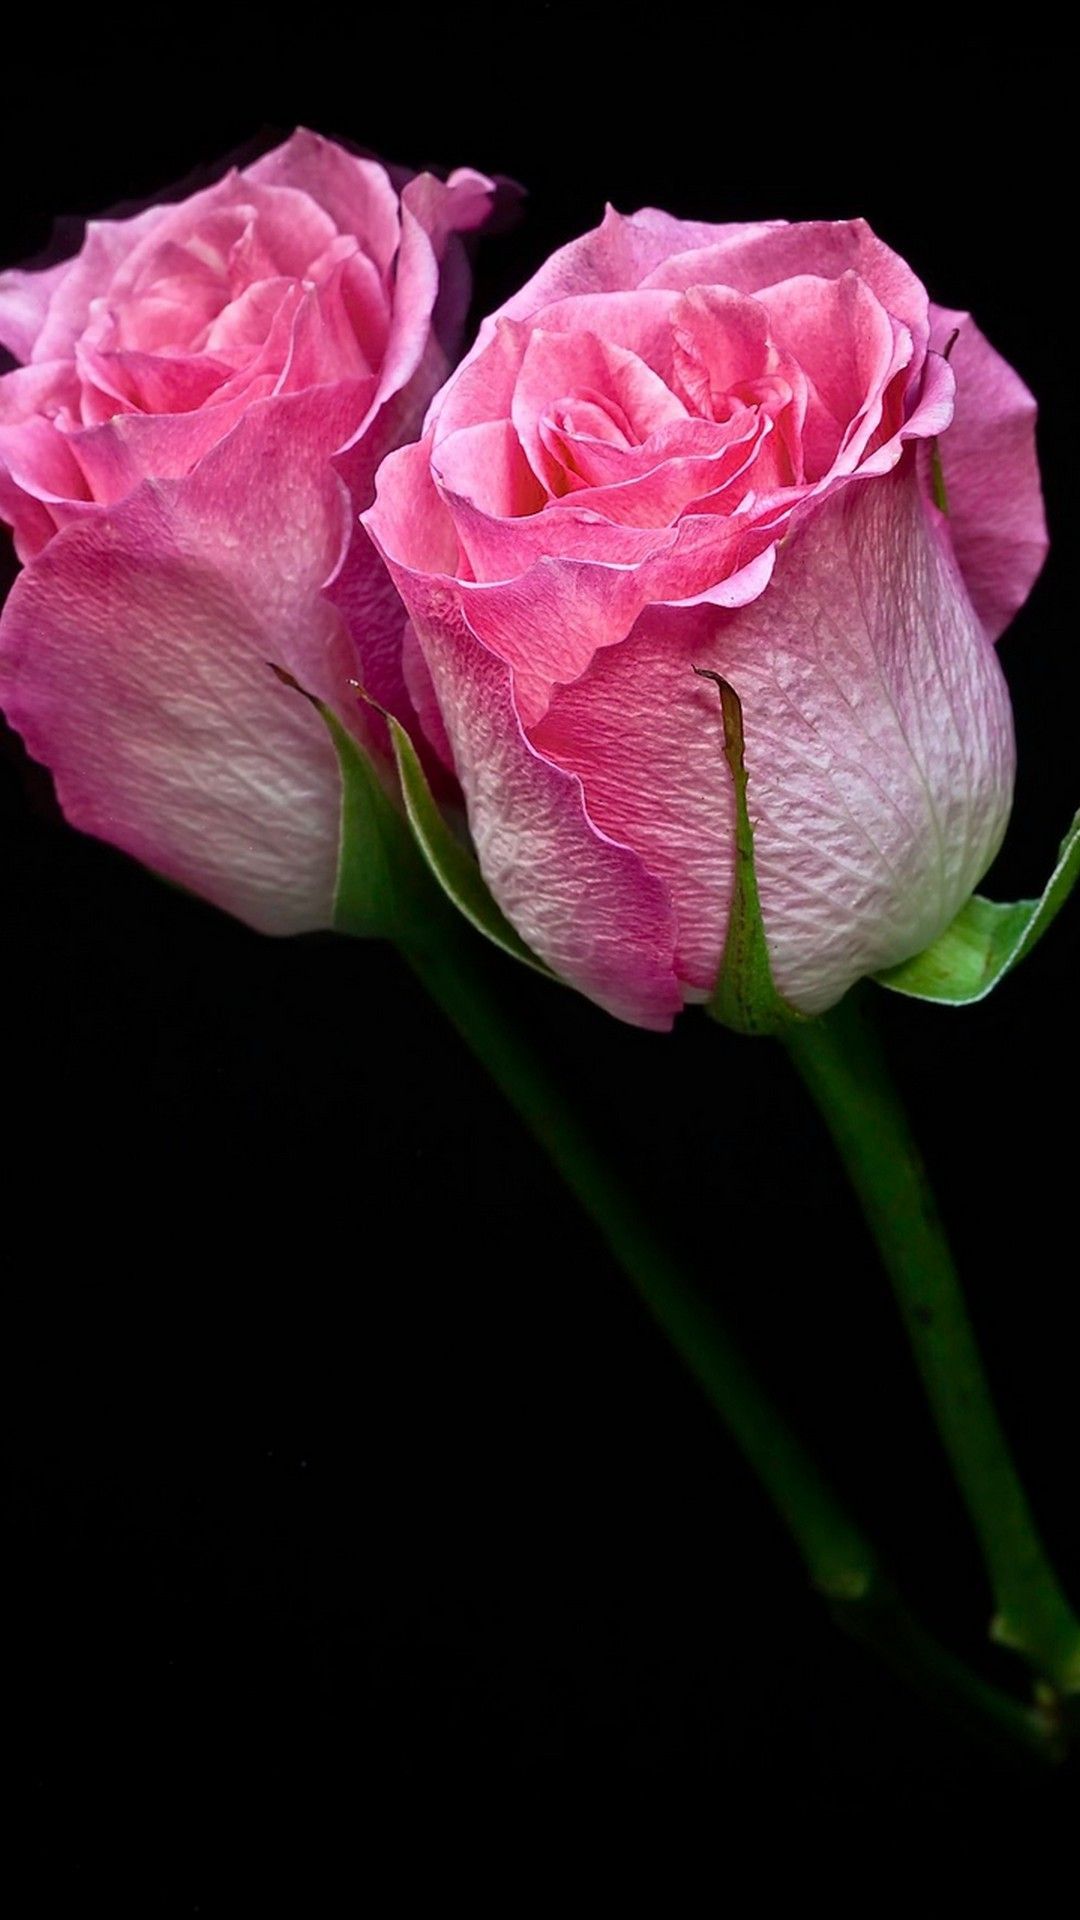 Pink Flower Wallpaper For Mobile Android. Best HD Wallpaper